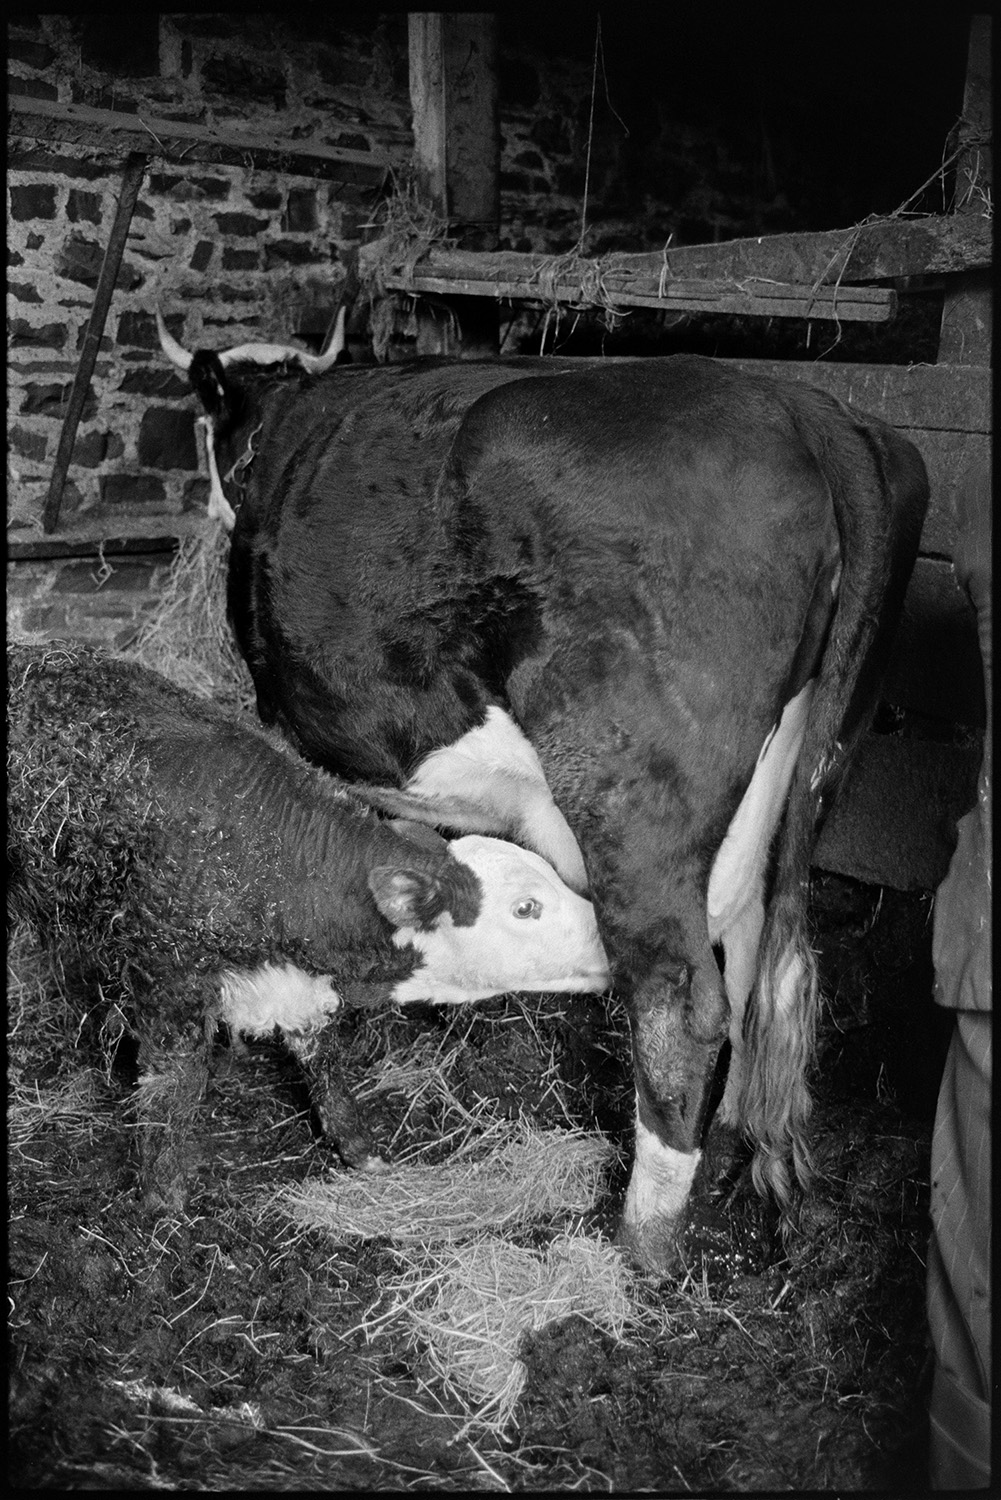 Farmer looking at calf and milking cow by hand, calf suckling. 
[A calf suckling a cow in a stone barn at Newhouse, Ashreigney.]